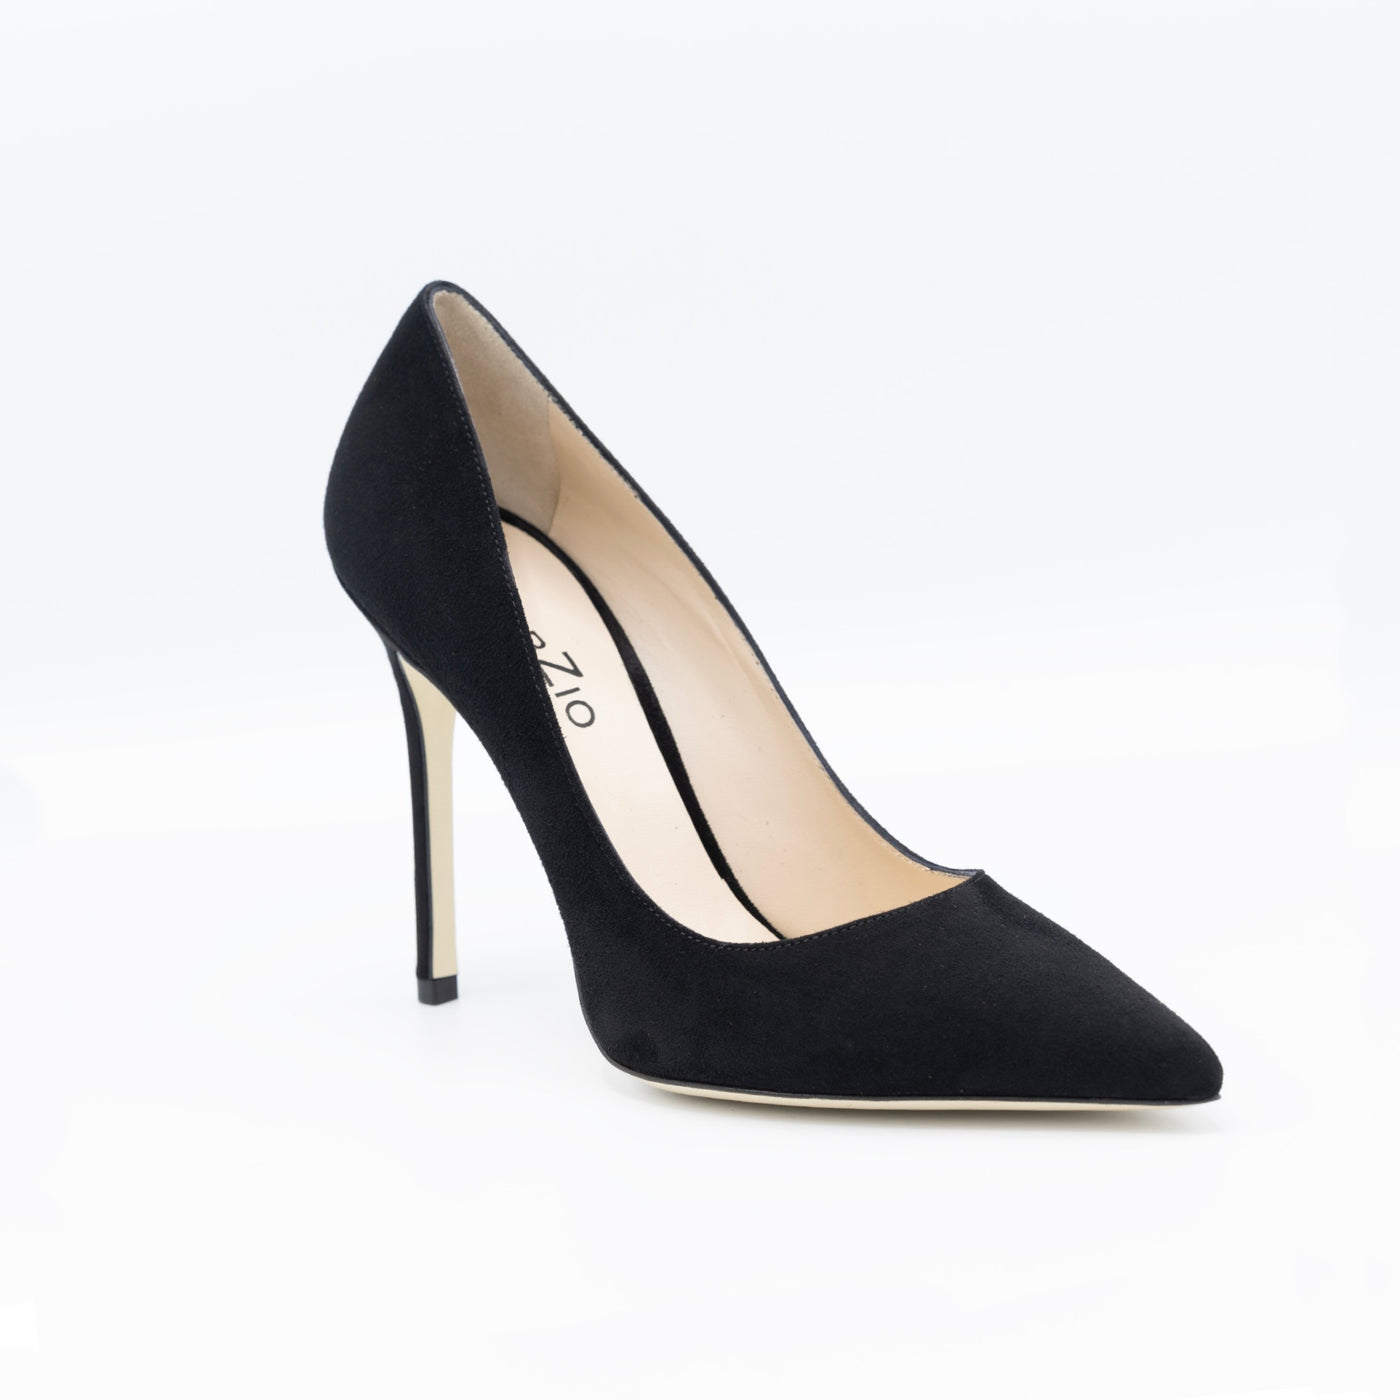 High heel pumps with pointy toes in black suede